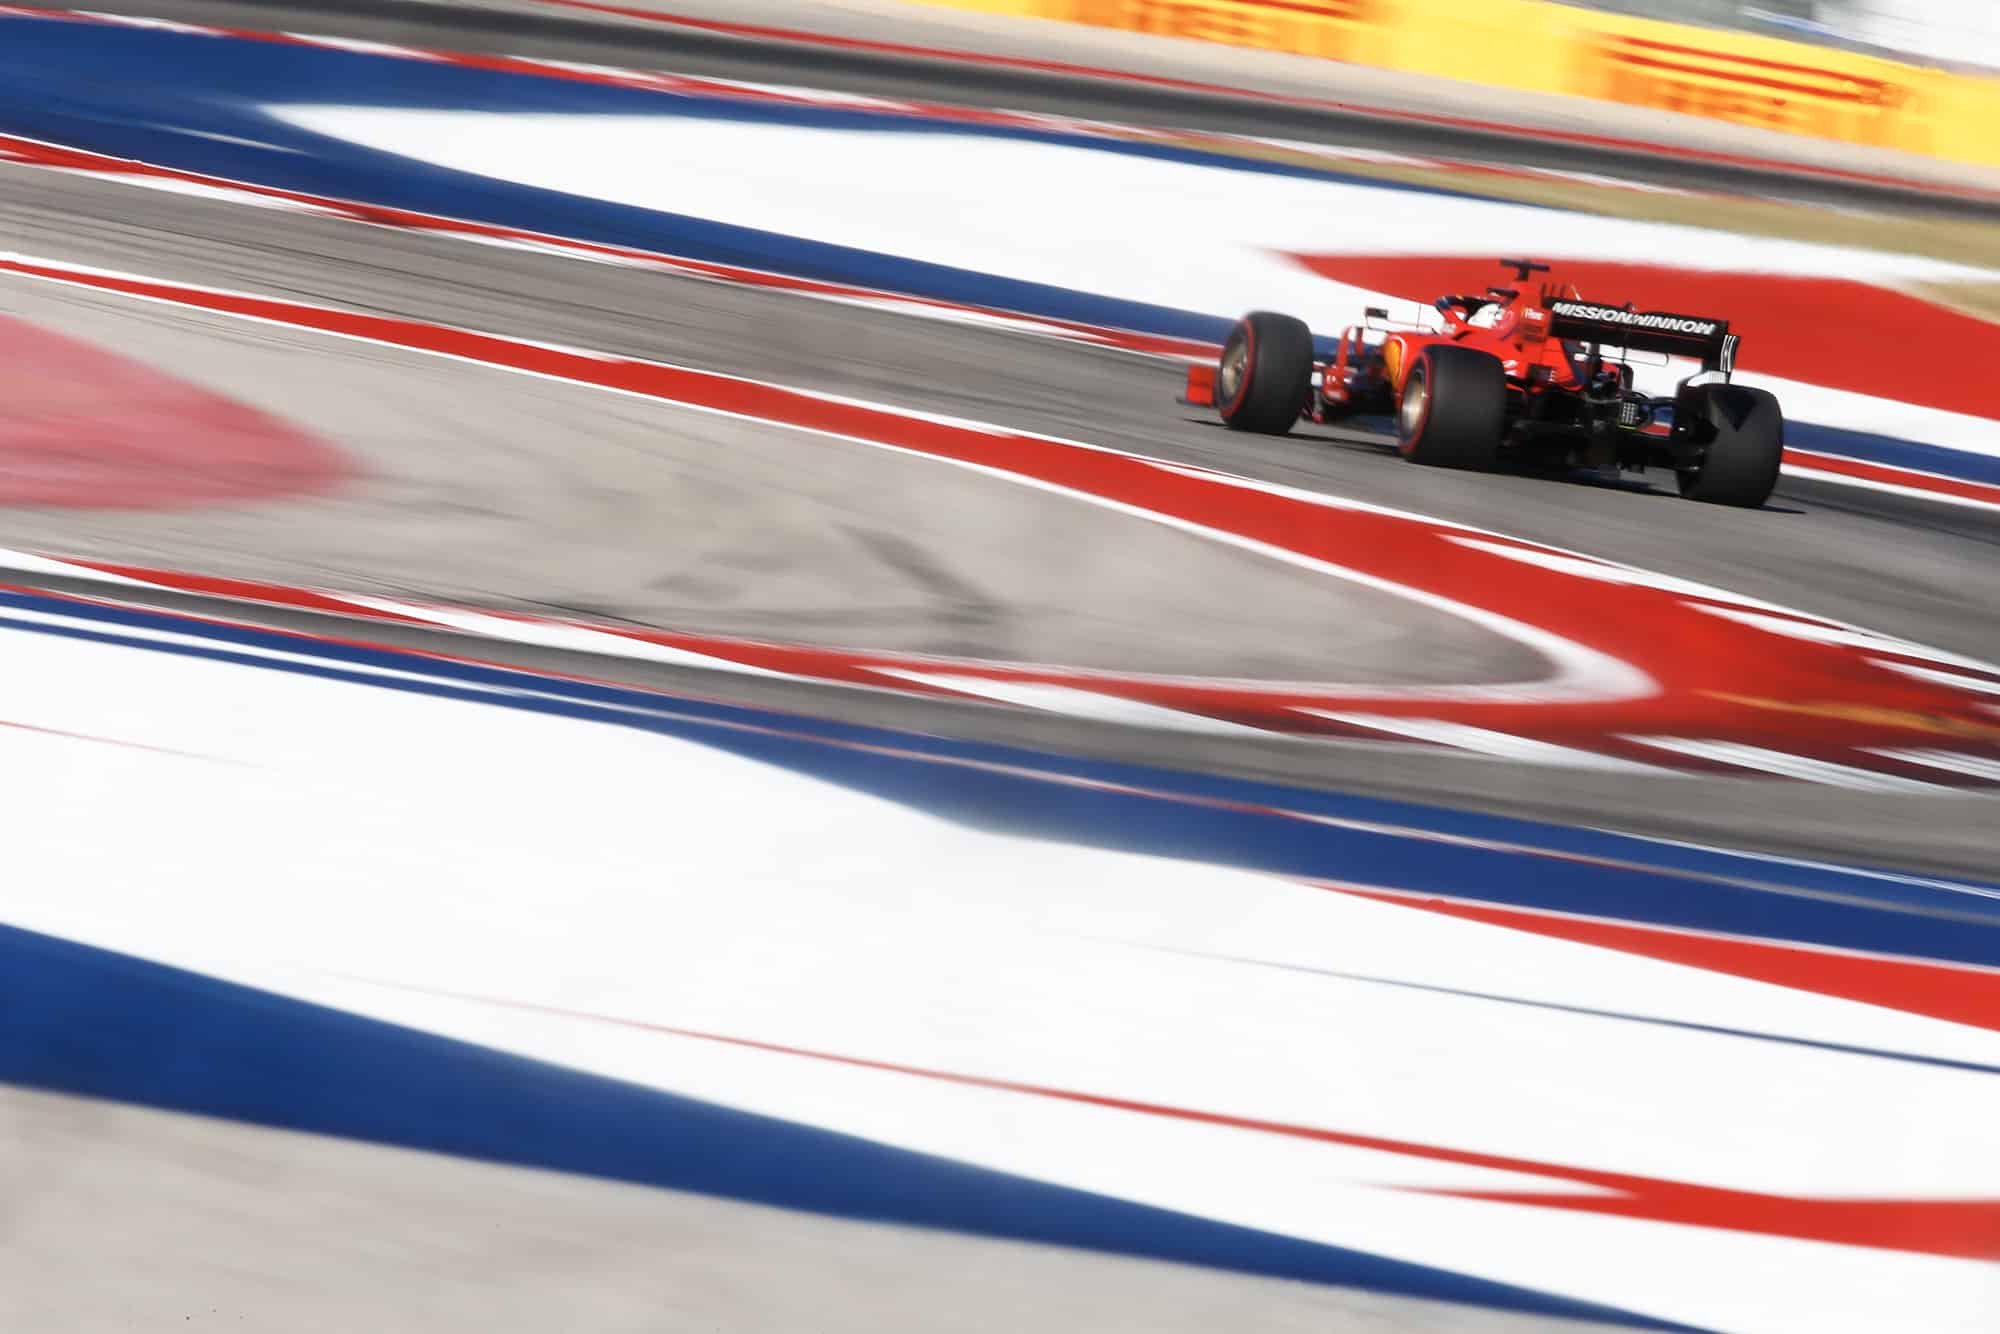 Ferrario through the Esses during qualifying for the 2019 US Grand Prix at Circuit of the Americas